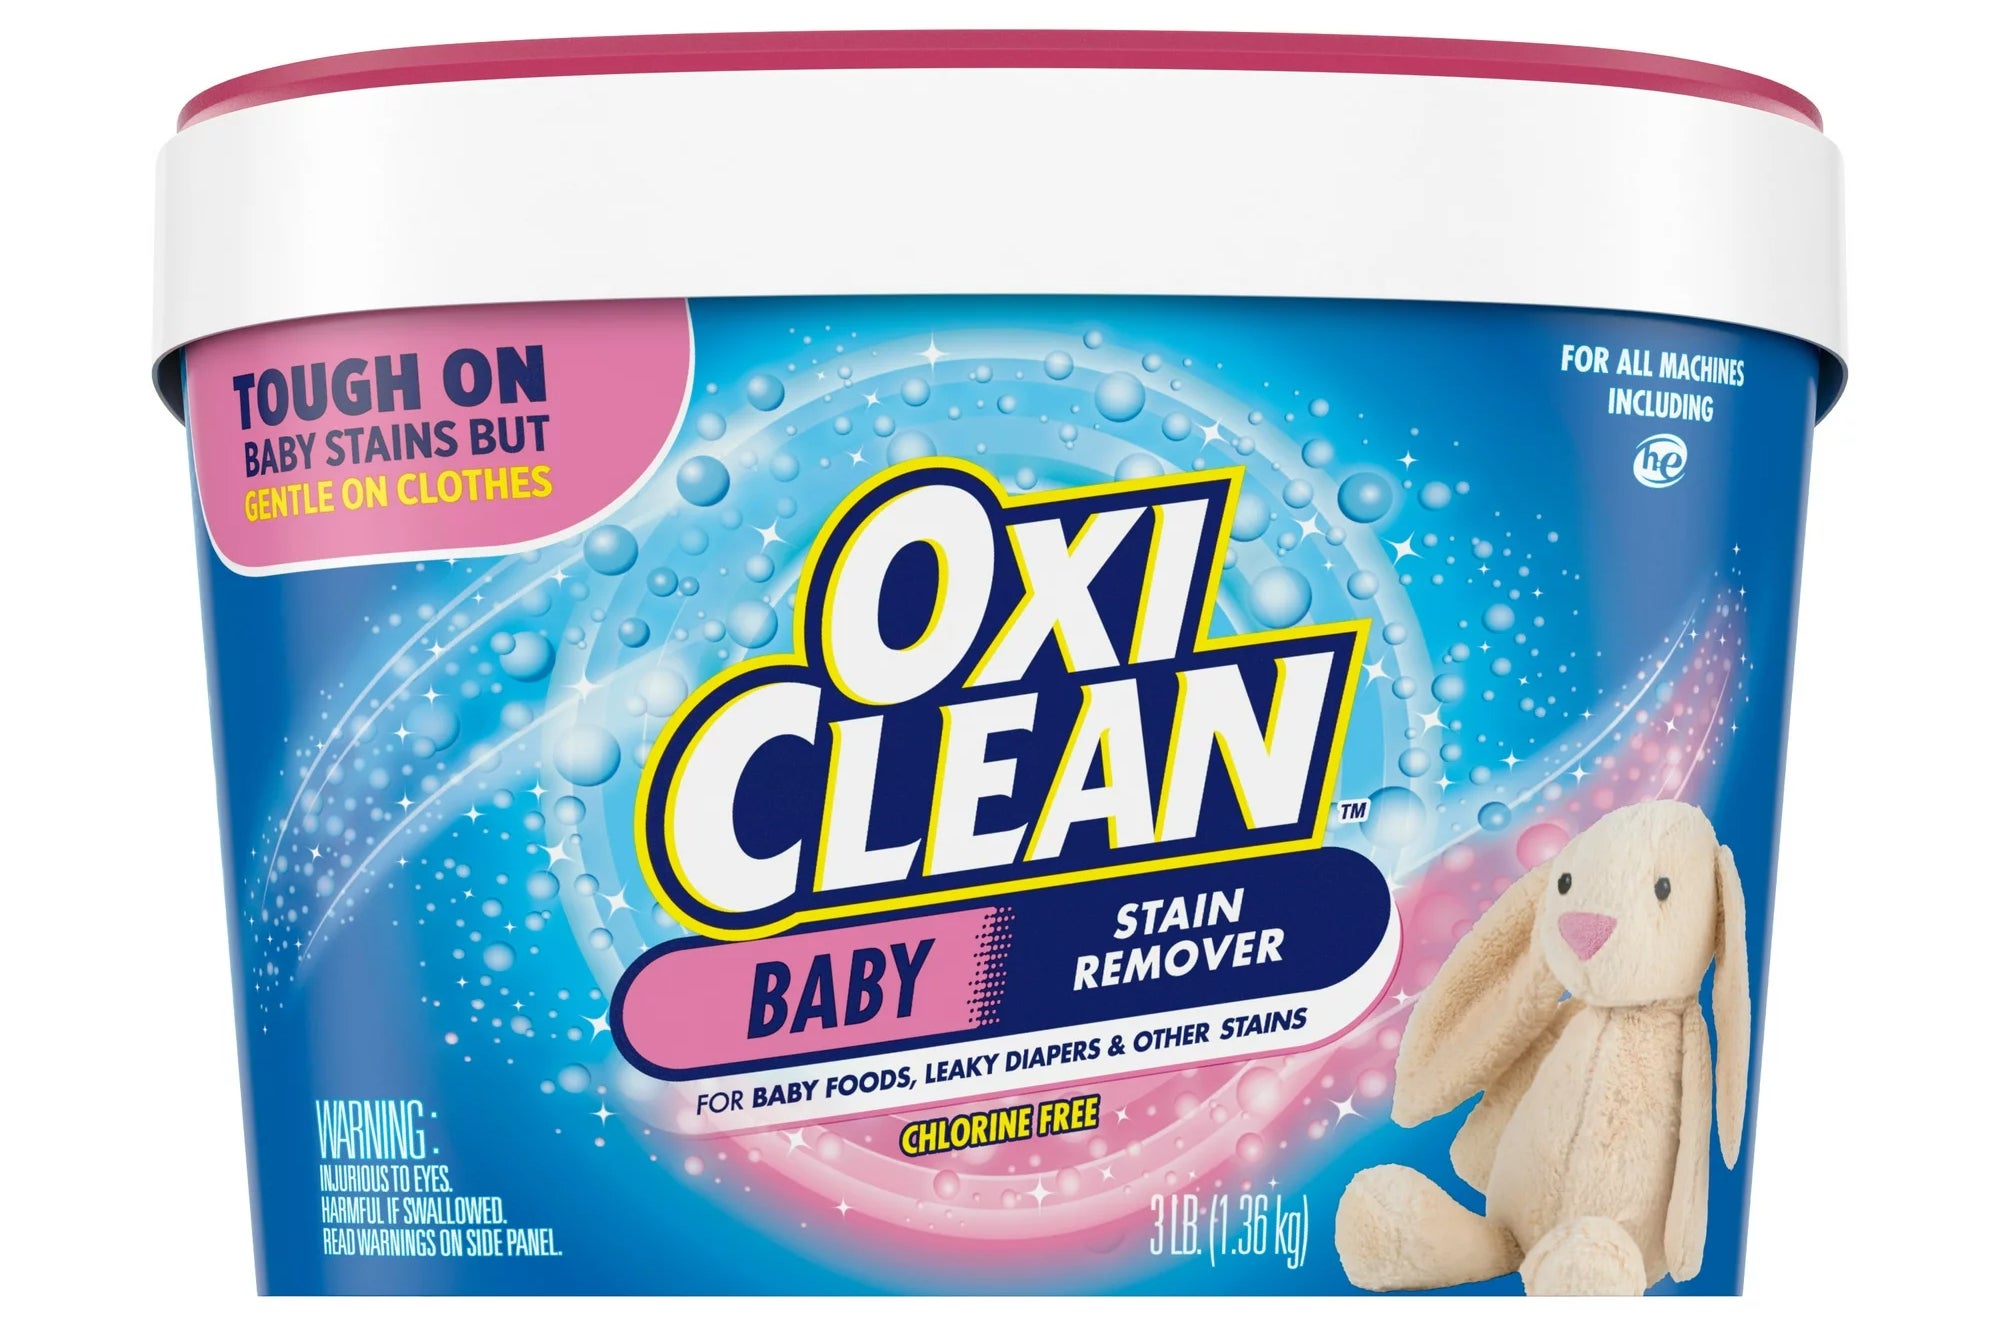 Oxi Clean packaging with pink accents